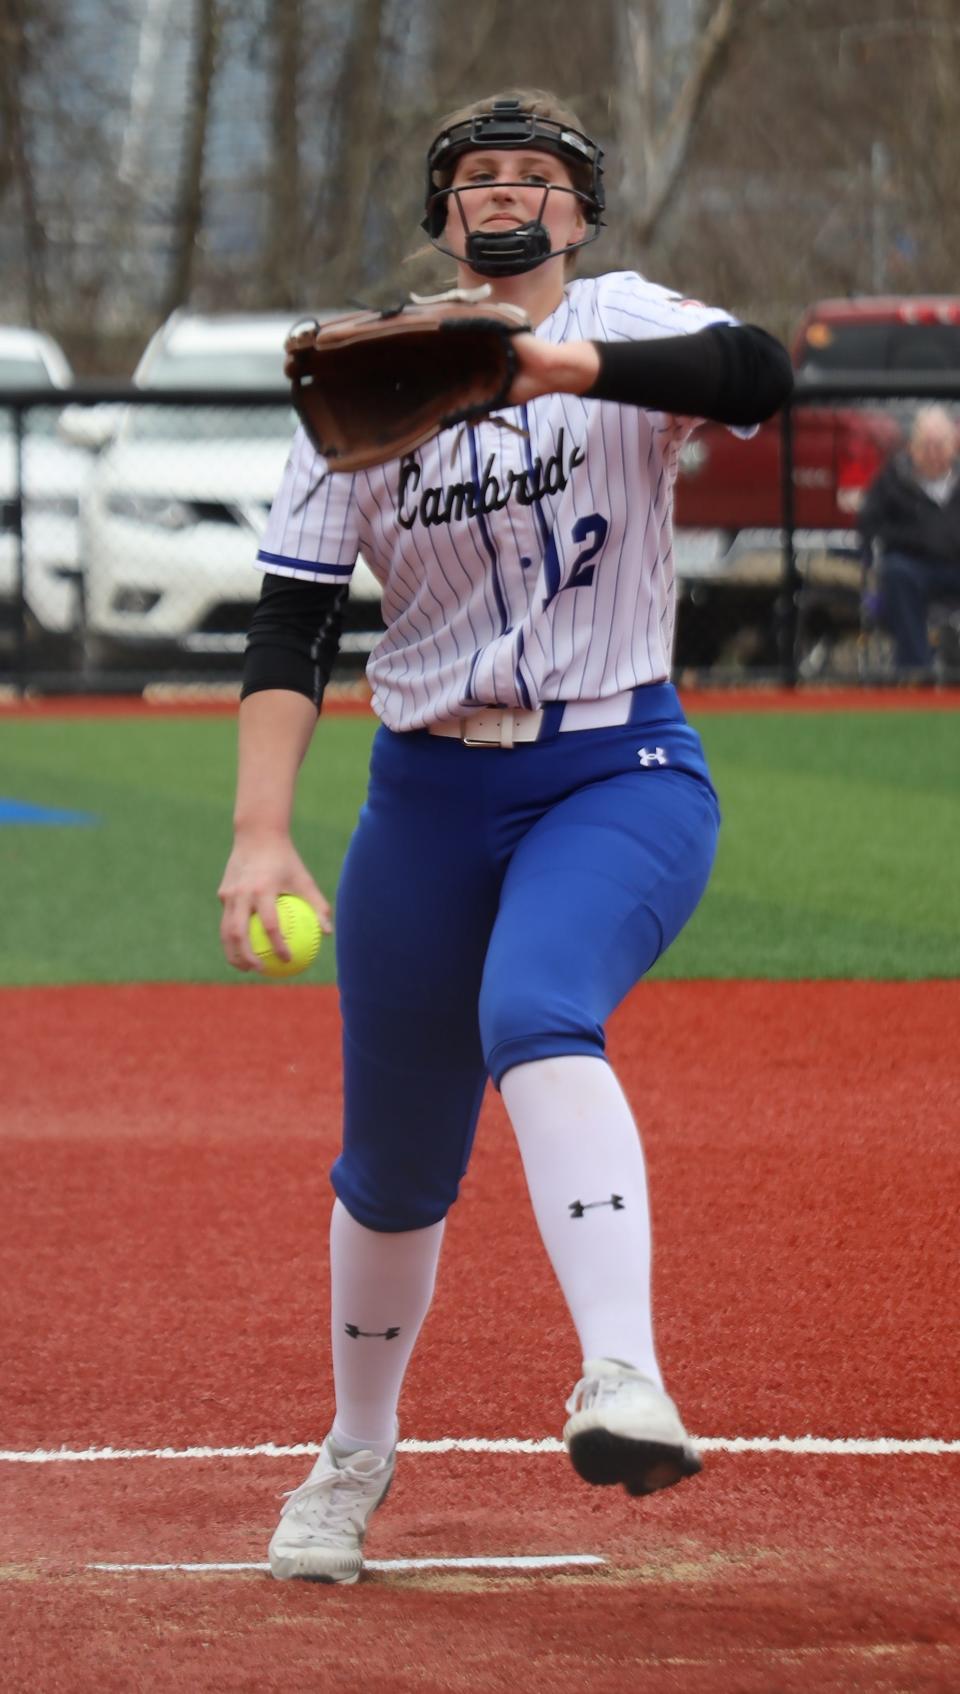 Cambridge senior Abby Mann (12) pitches the ball during the Warriors versus Bobcats softball game Saturday at Buckeye Trail High School. Mann had dominated from the pitching circle during the Lady Bobcats' 8-1 start to the season. Mann has complied a perfect 7-0 record with a 2.33 ERA and a whopping 90 striekouts,